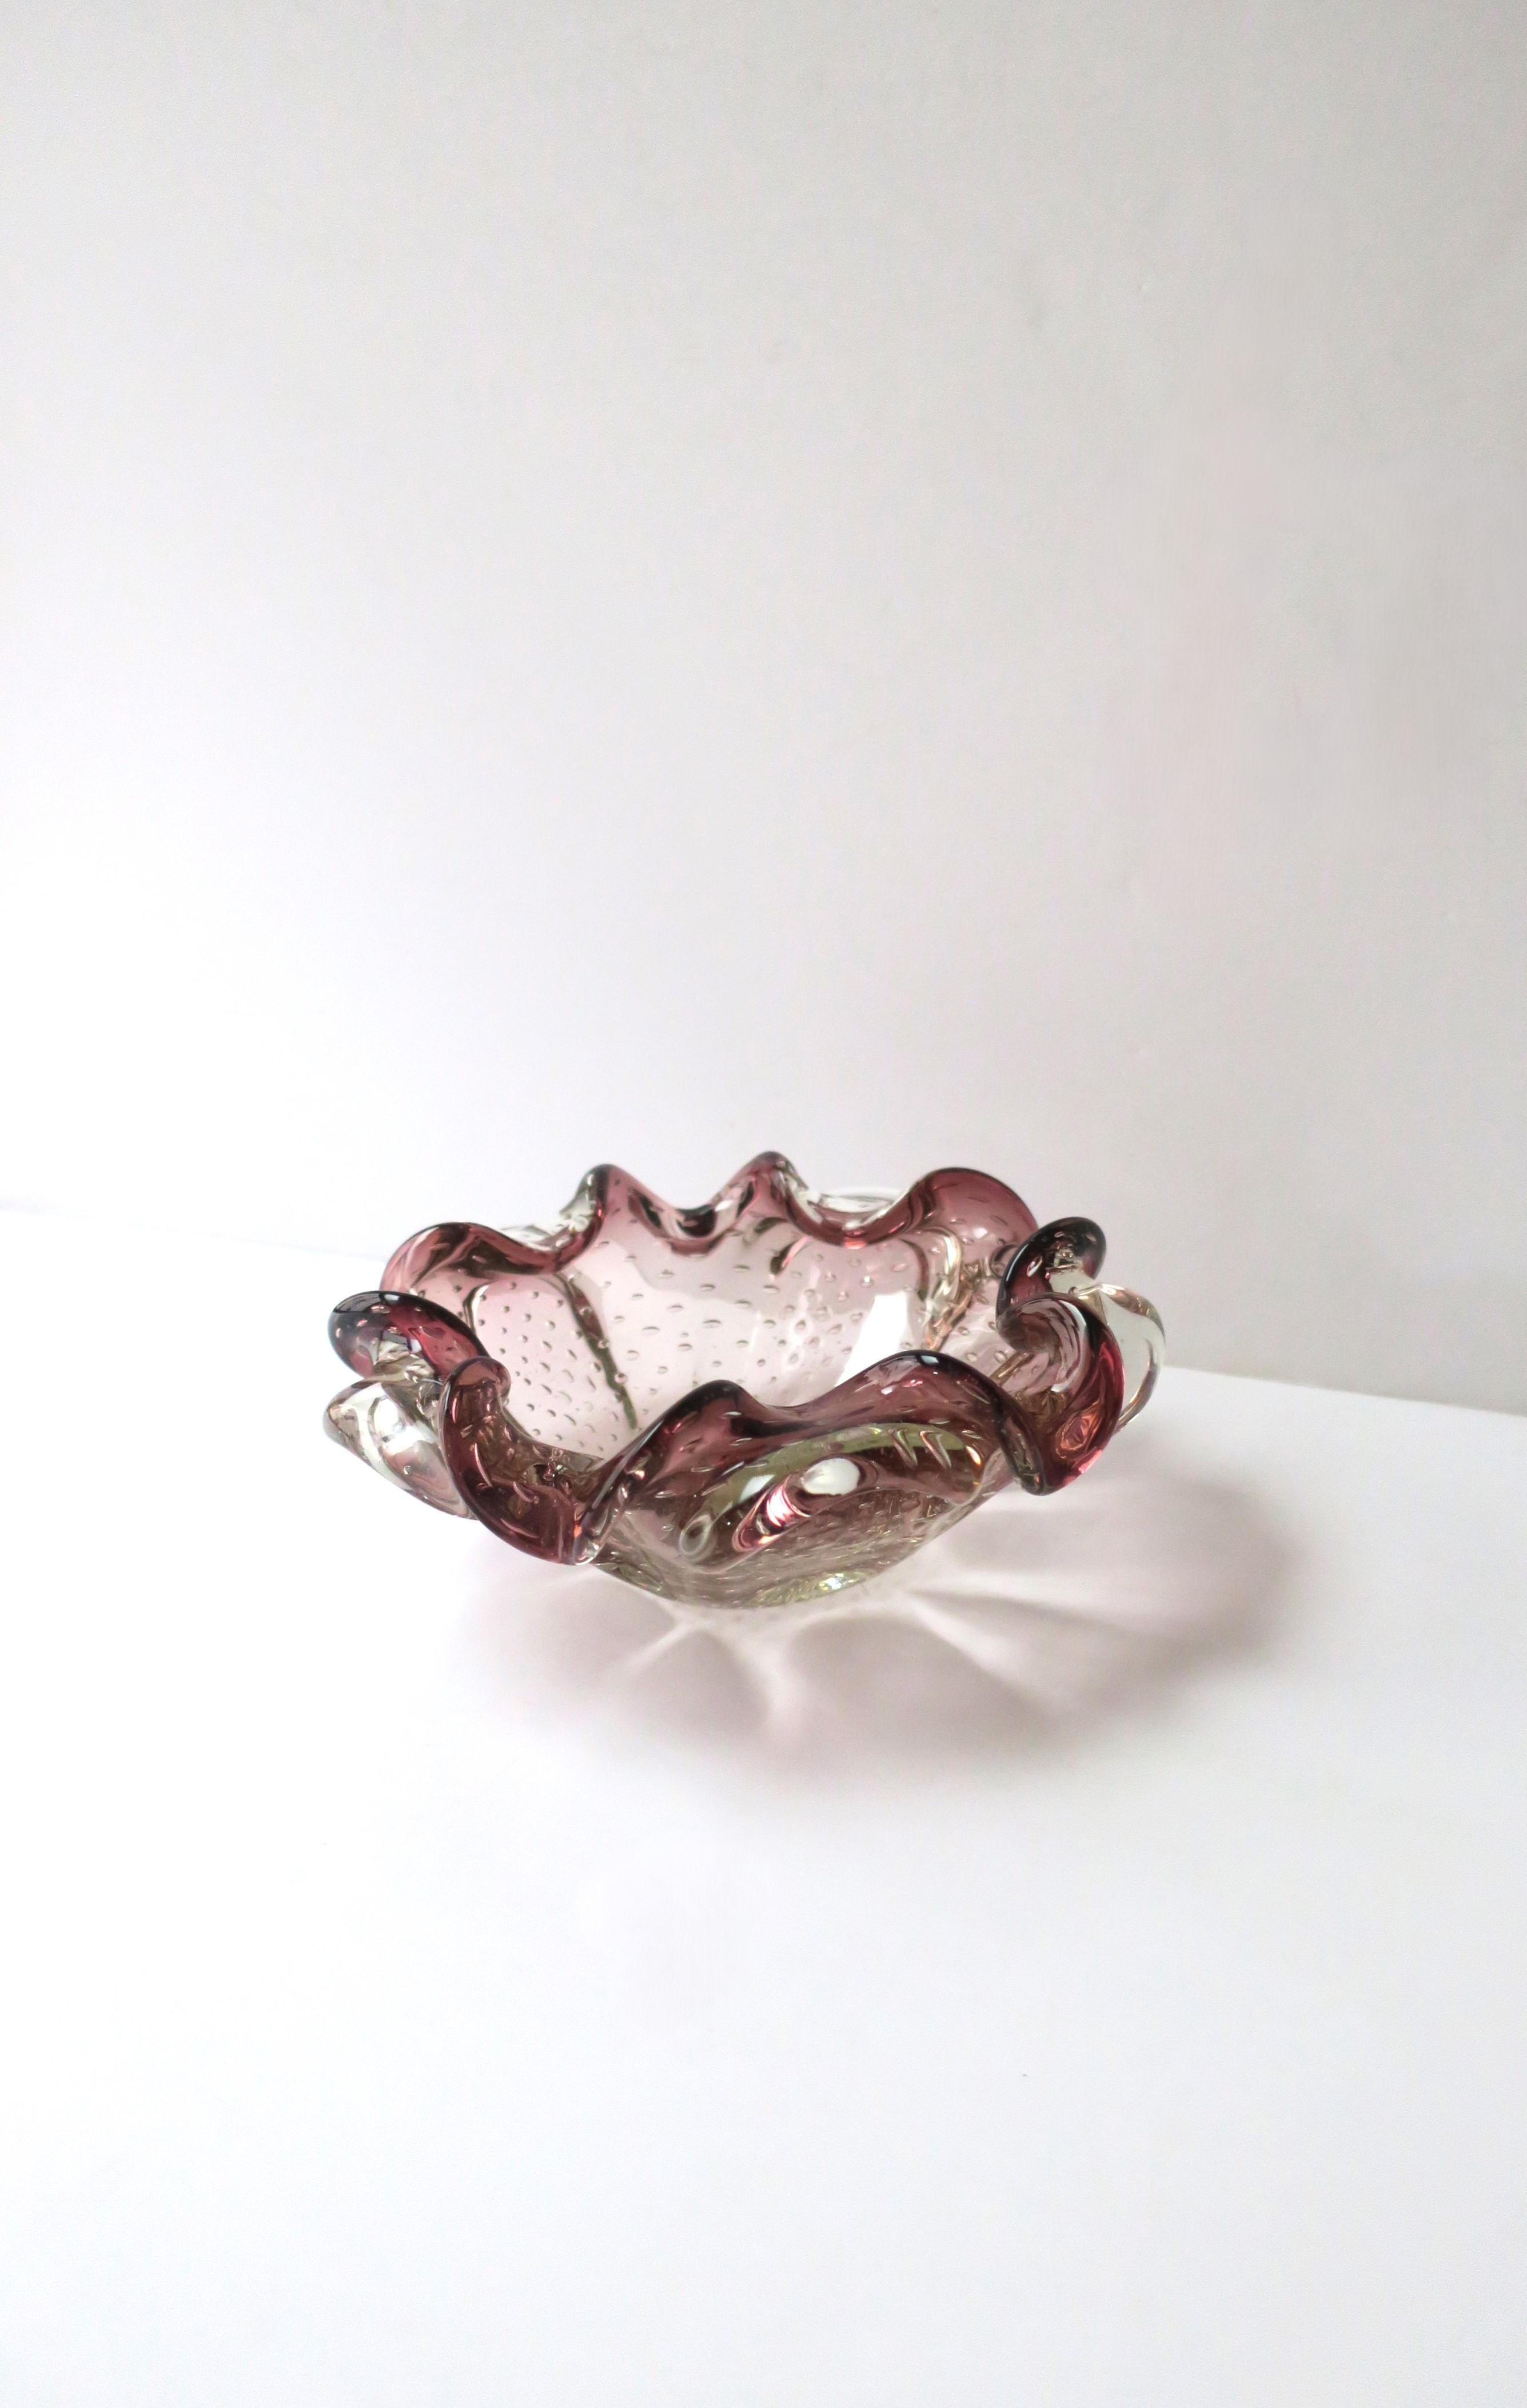 A beautiful and substantial vintage Italian Murano burgundy/plum/aubergine and transparent art glass bowl with a controlled bubble design, Midcentury Modern design period, circa mid-20th century, Italy. Great as a standalone piece on a cocktail